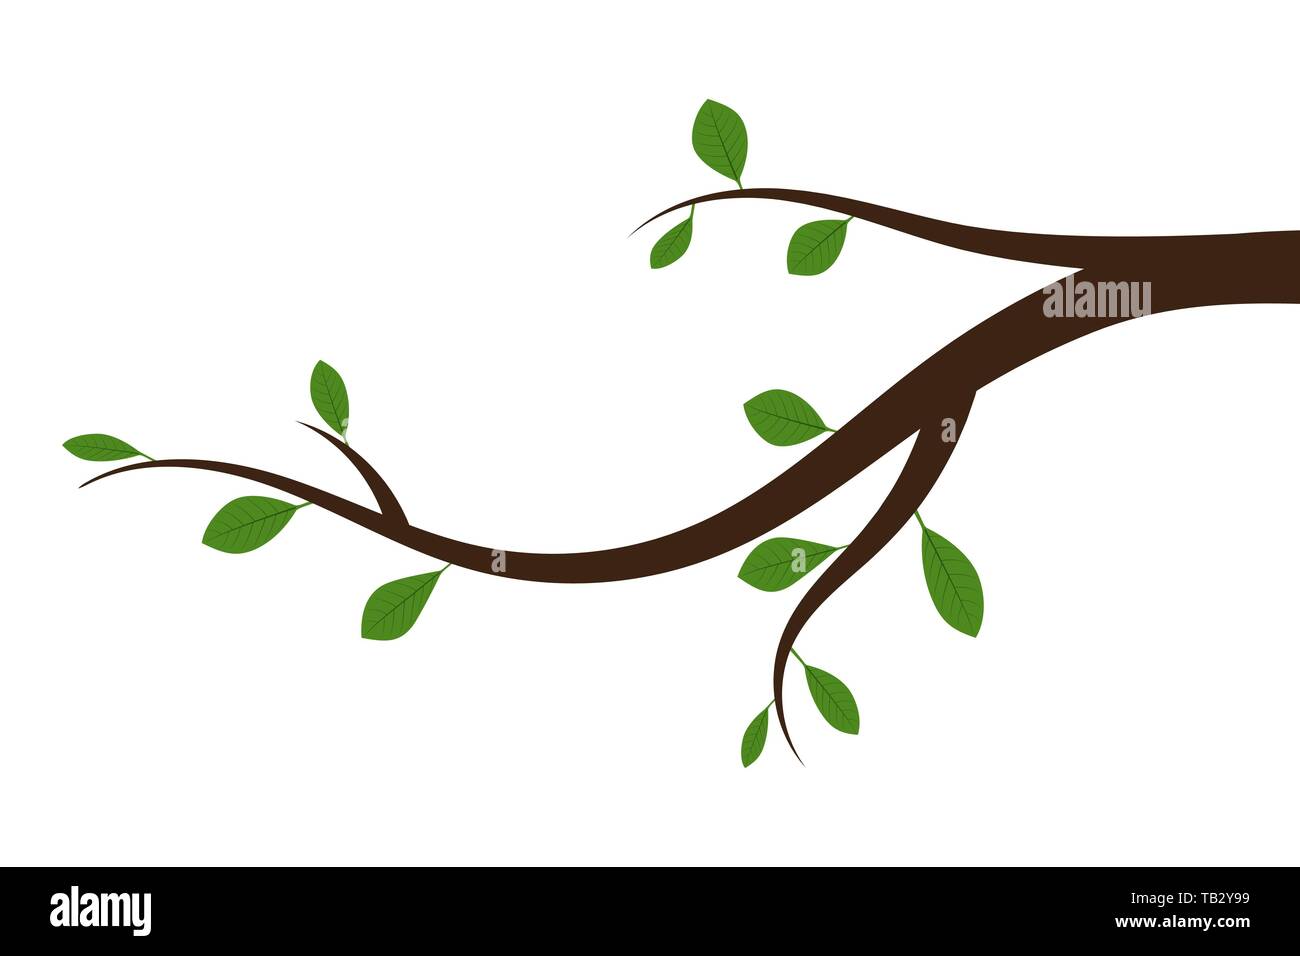 Tree branch with green leaves. Vector illustration. Abstract branch with leaves, isolated. Stock Vector